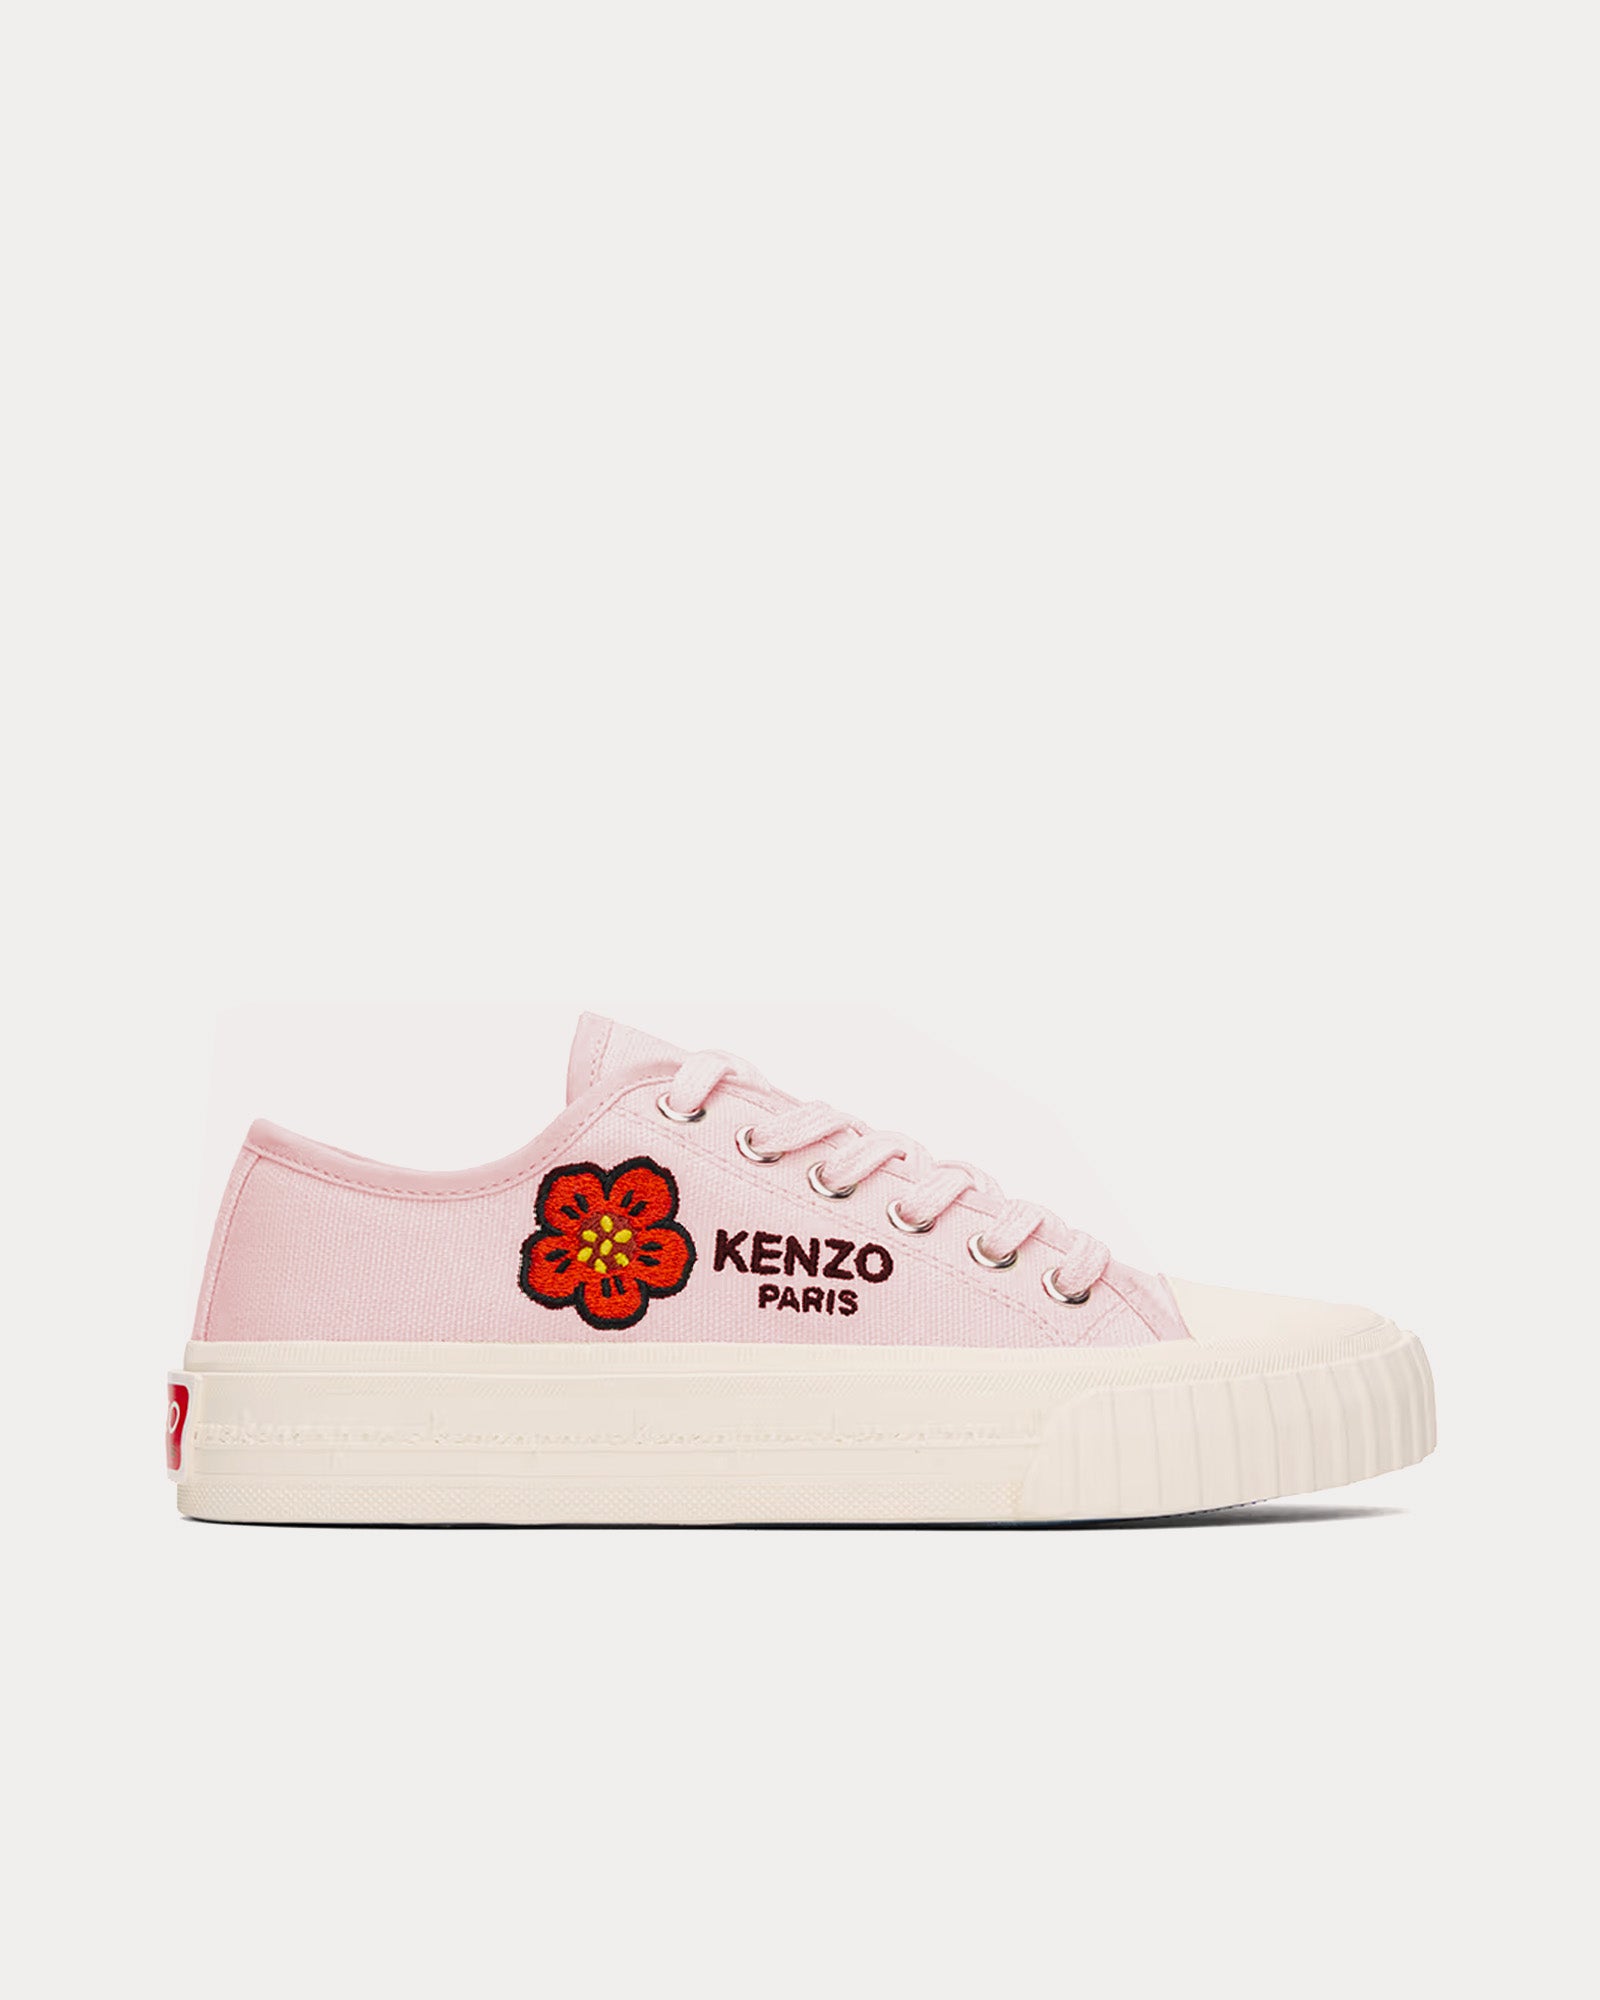 Kenzo - Kenzo Foxy Canvas Faded Pink Low Top Sneakers